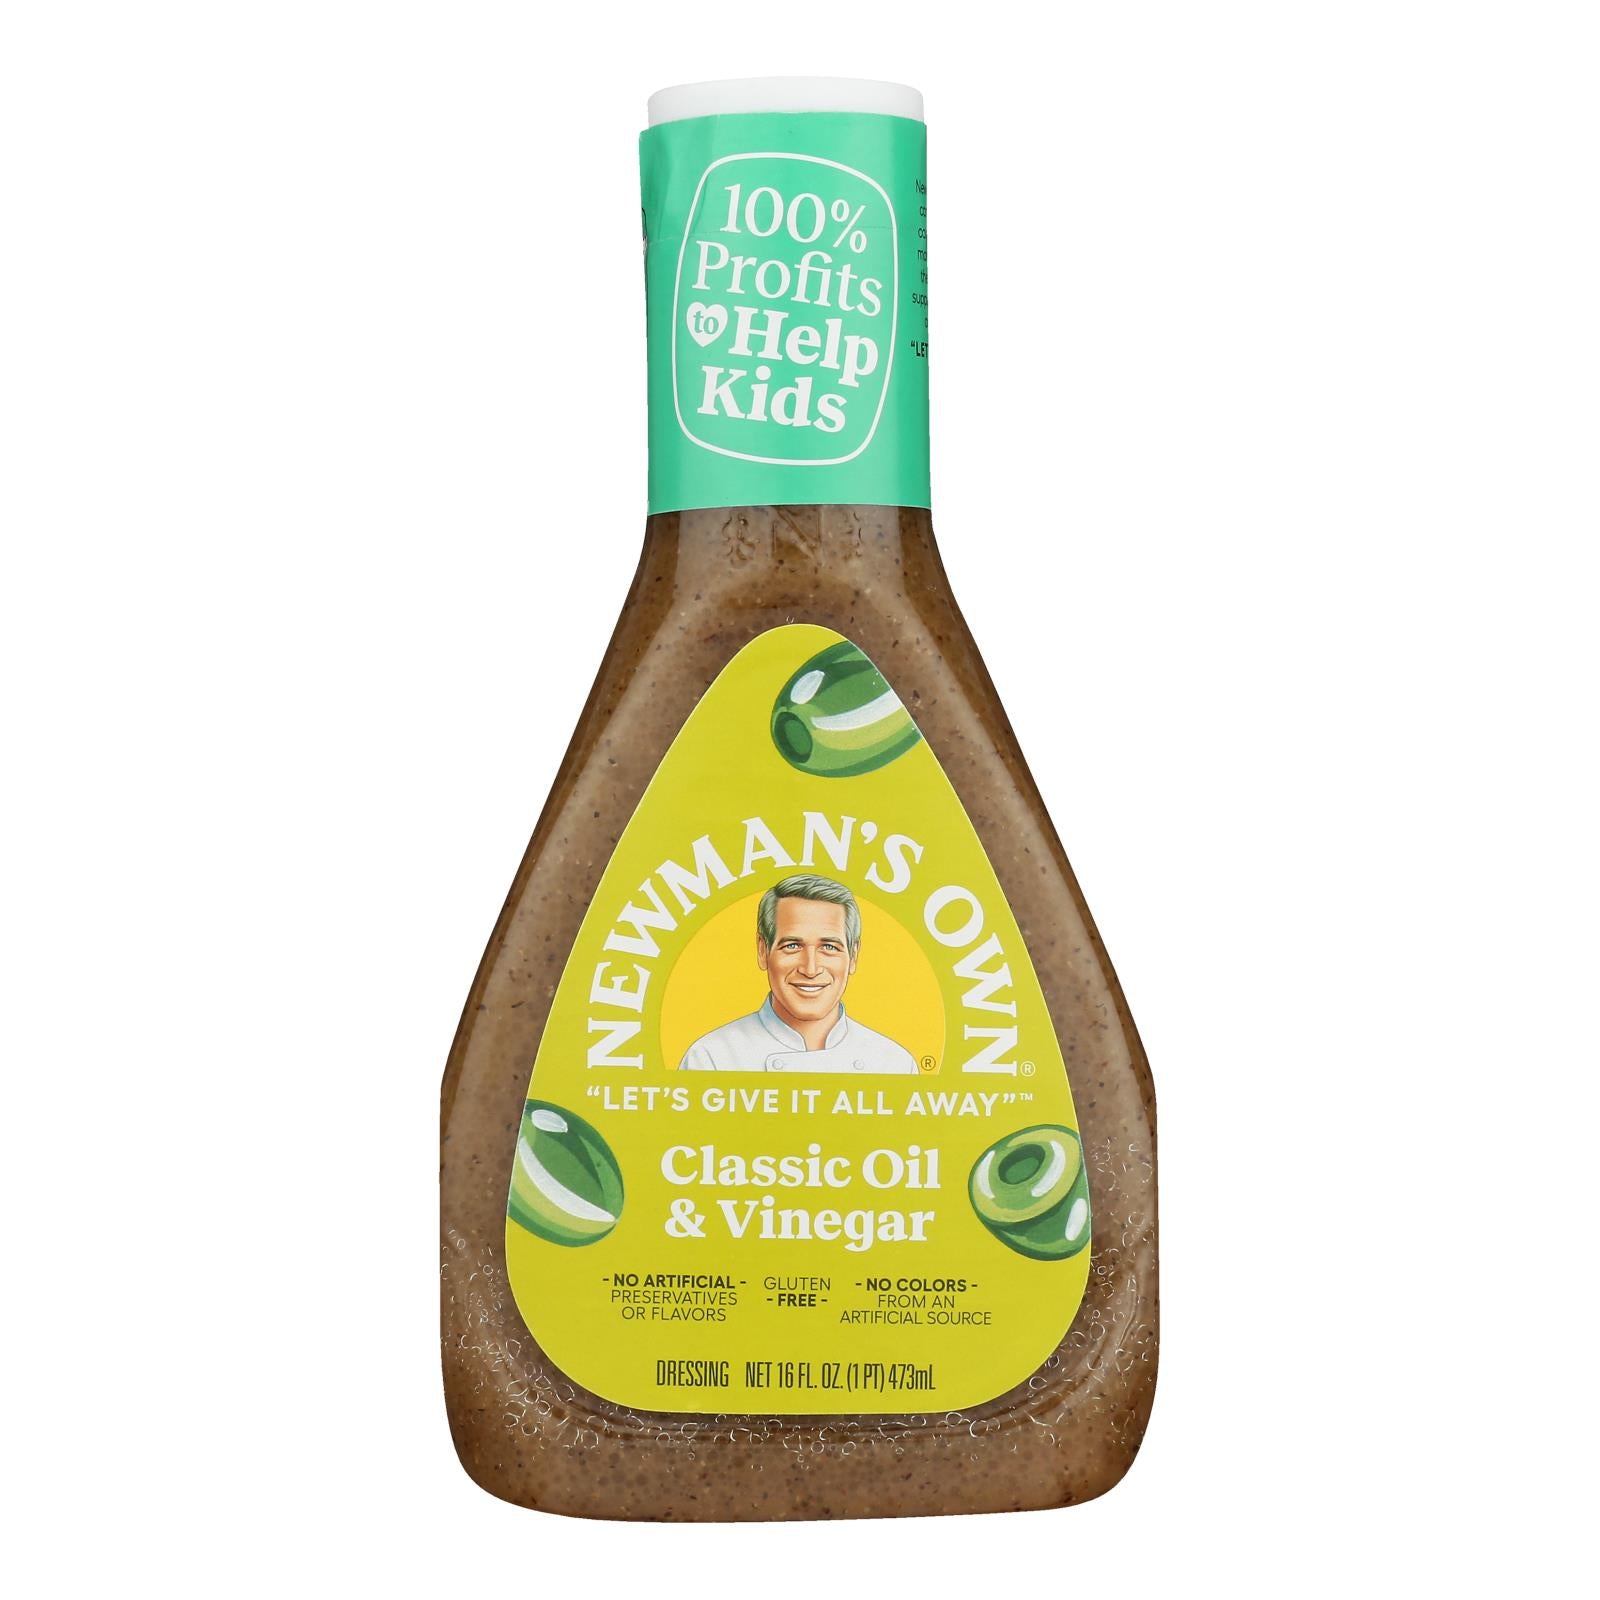 Newman's Own Red Wine Dressing - Vinegar And Olive Oil - Case Of 6 - 16 Fl Oz.